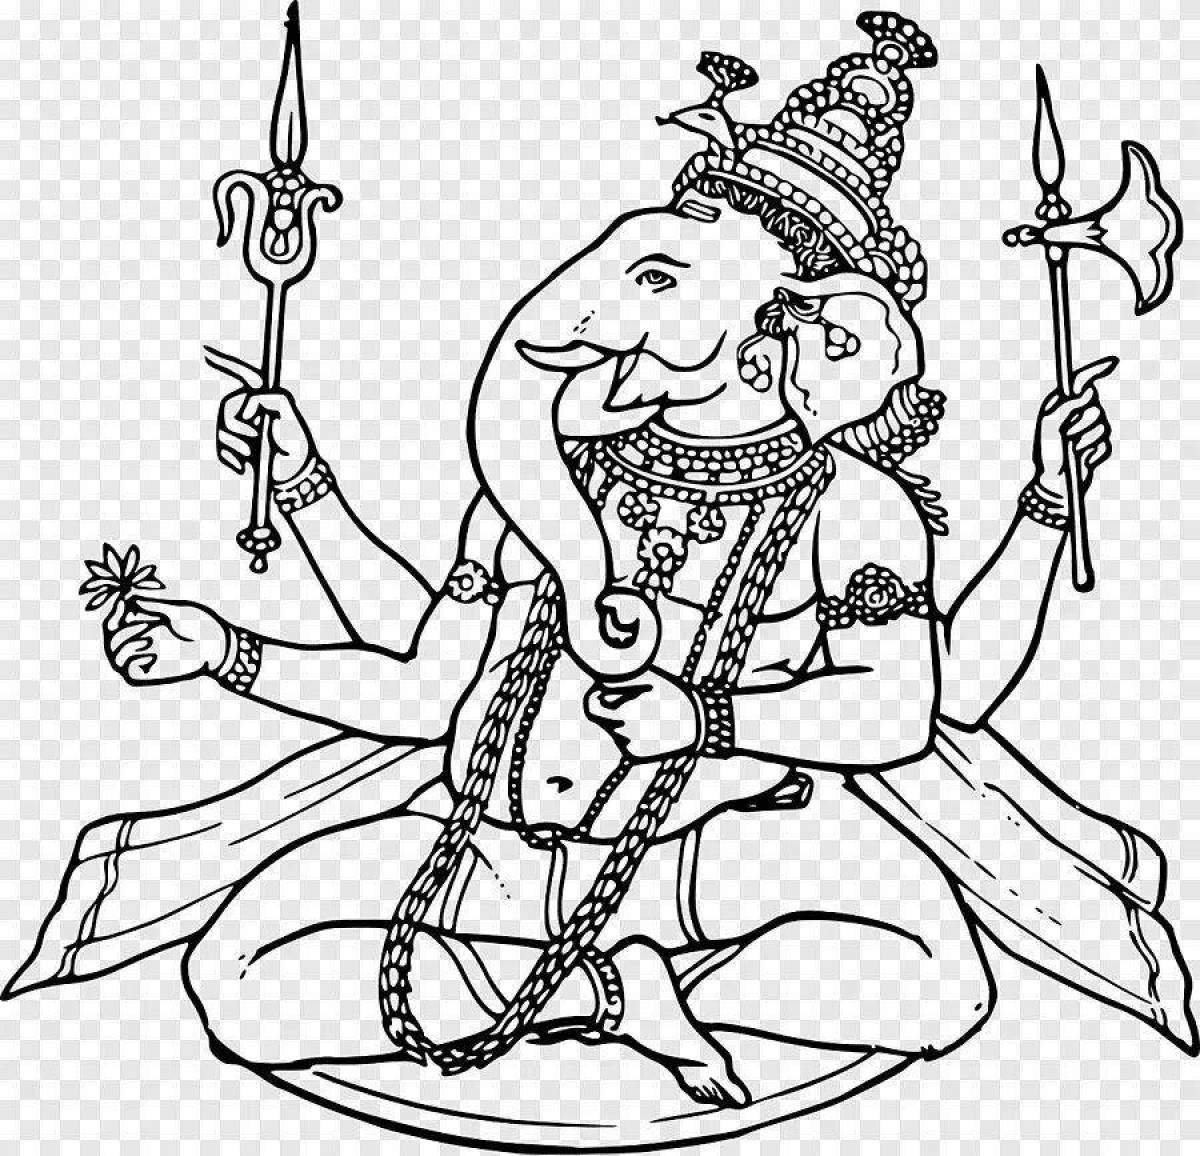 Shiva's dynamic coloring page